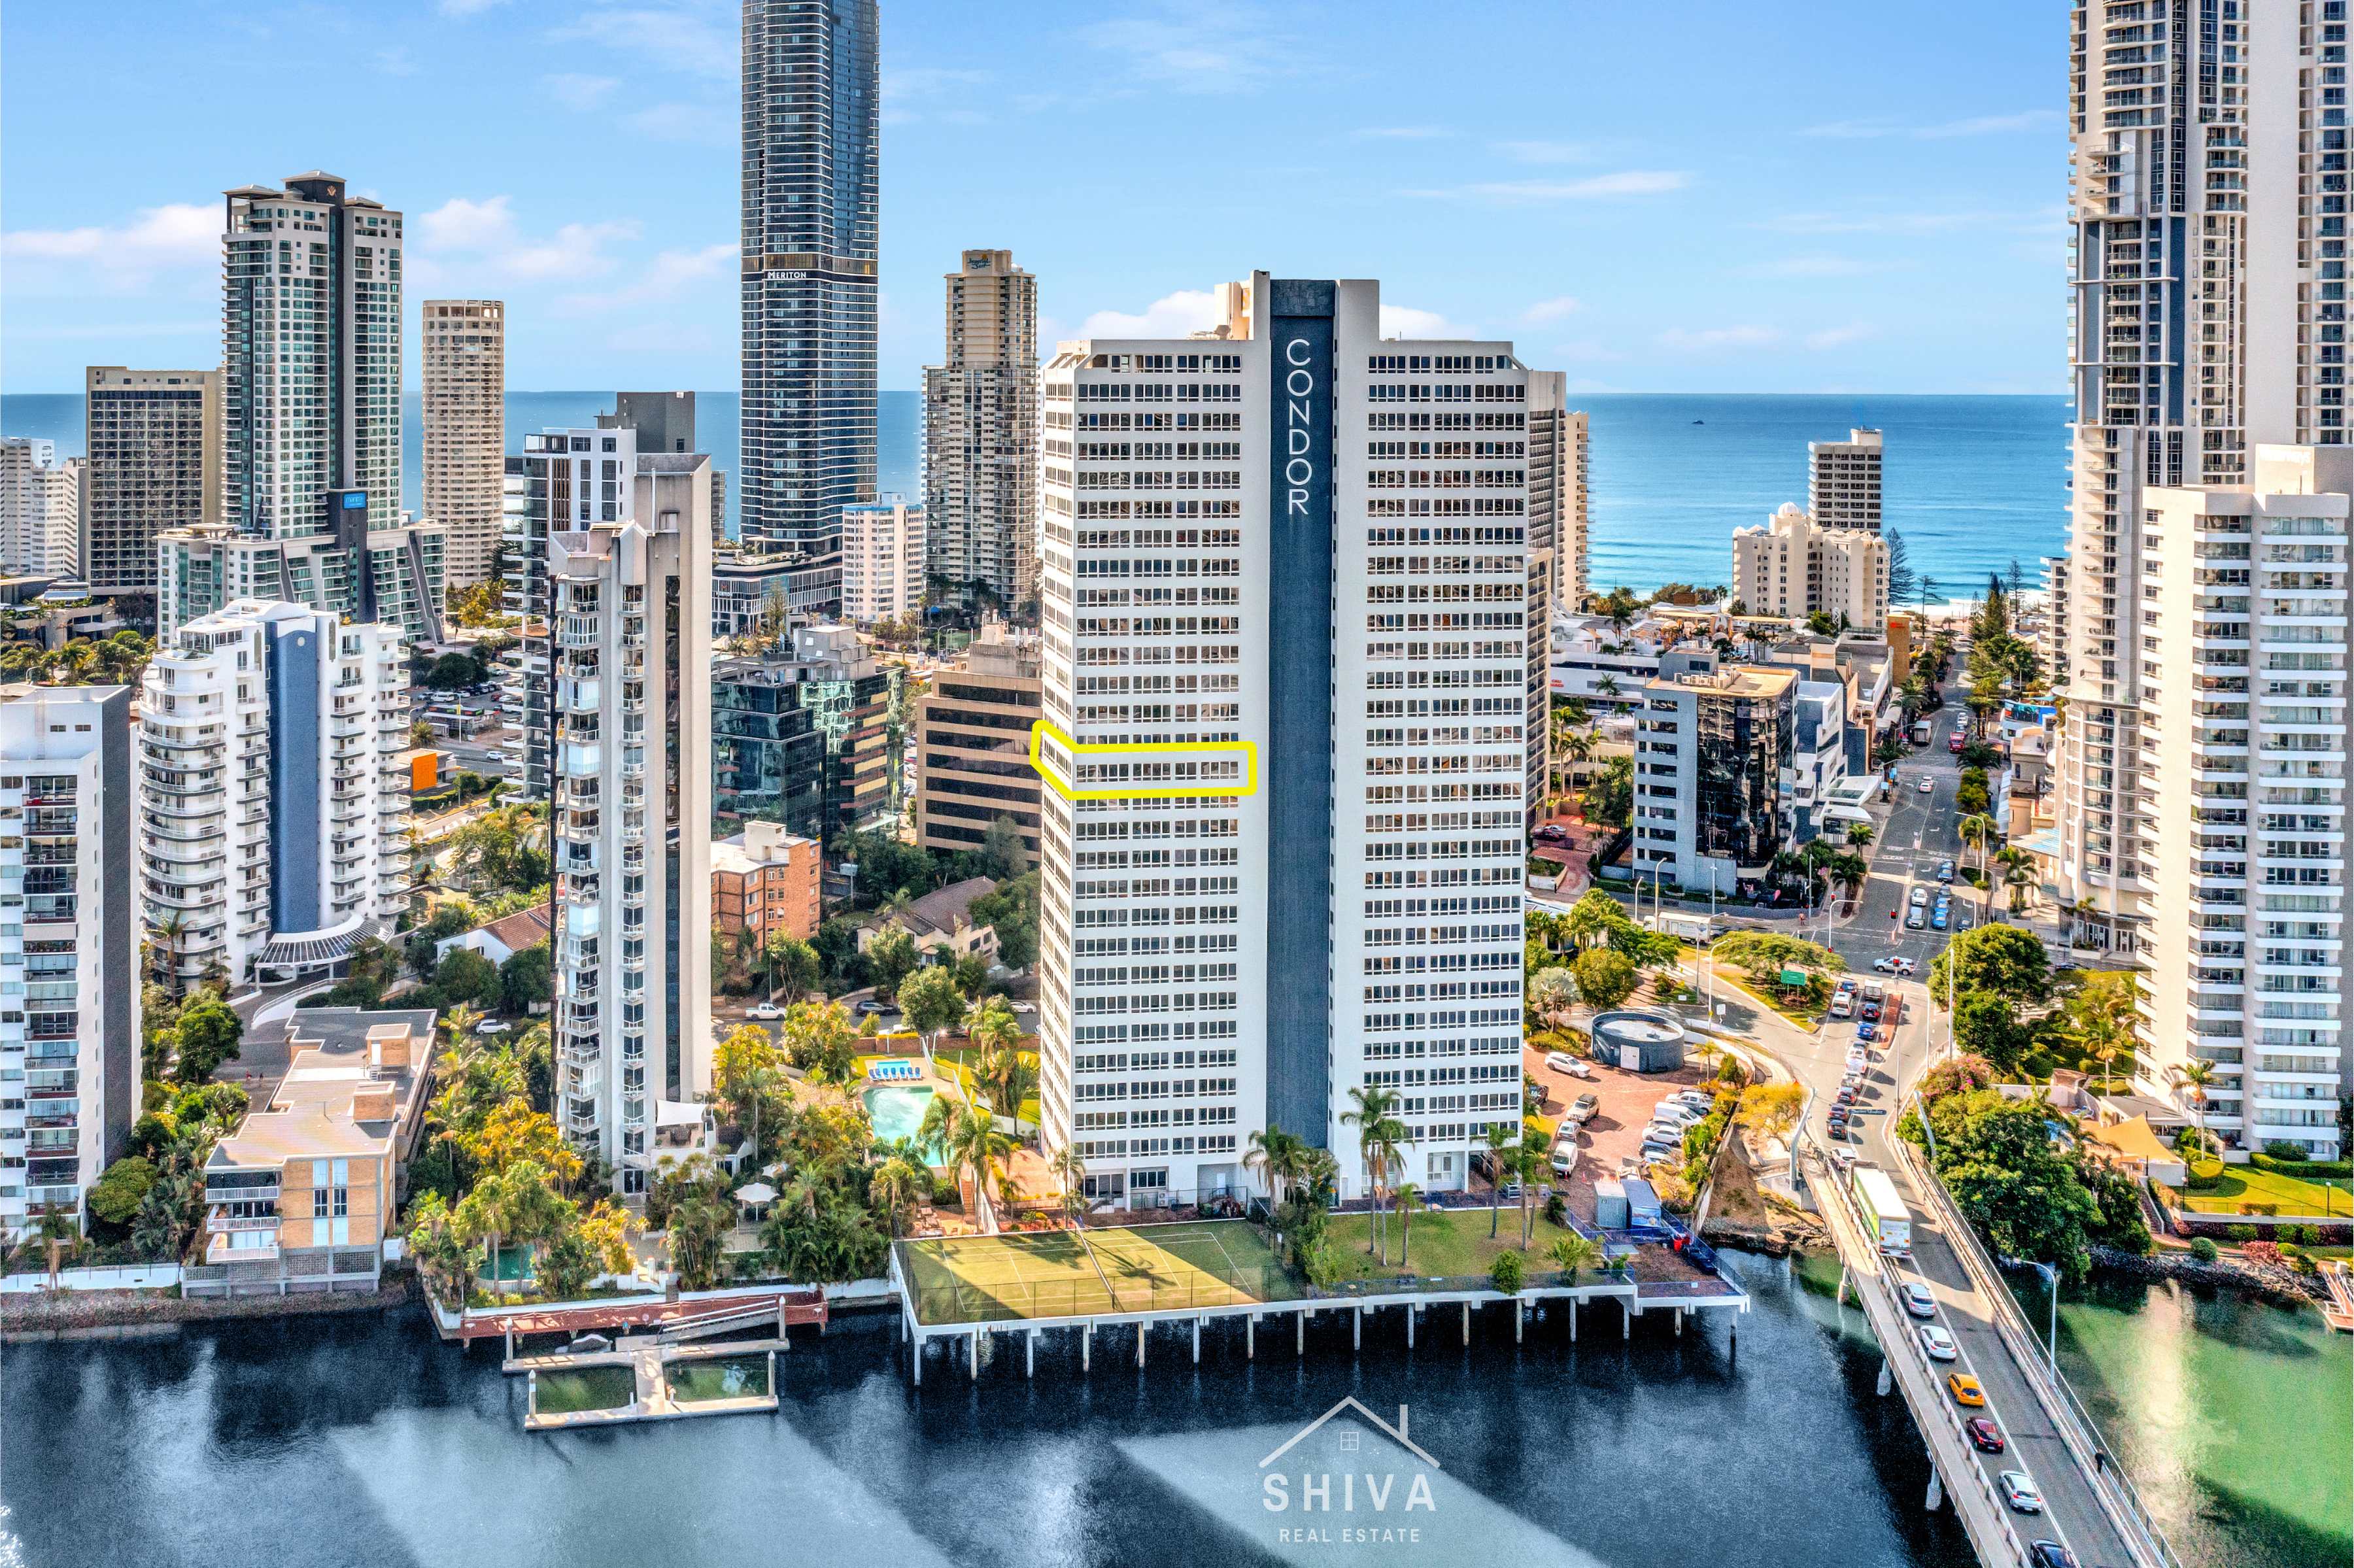 Surfers Paradise QLD 4217 - 2 beds apartment for Sale, BRAND-NEW 2